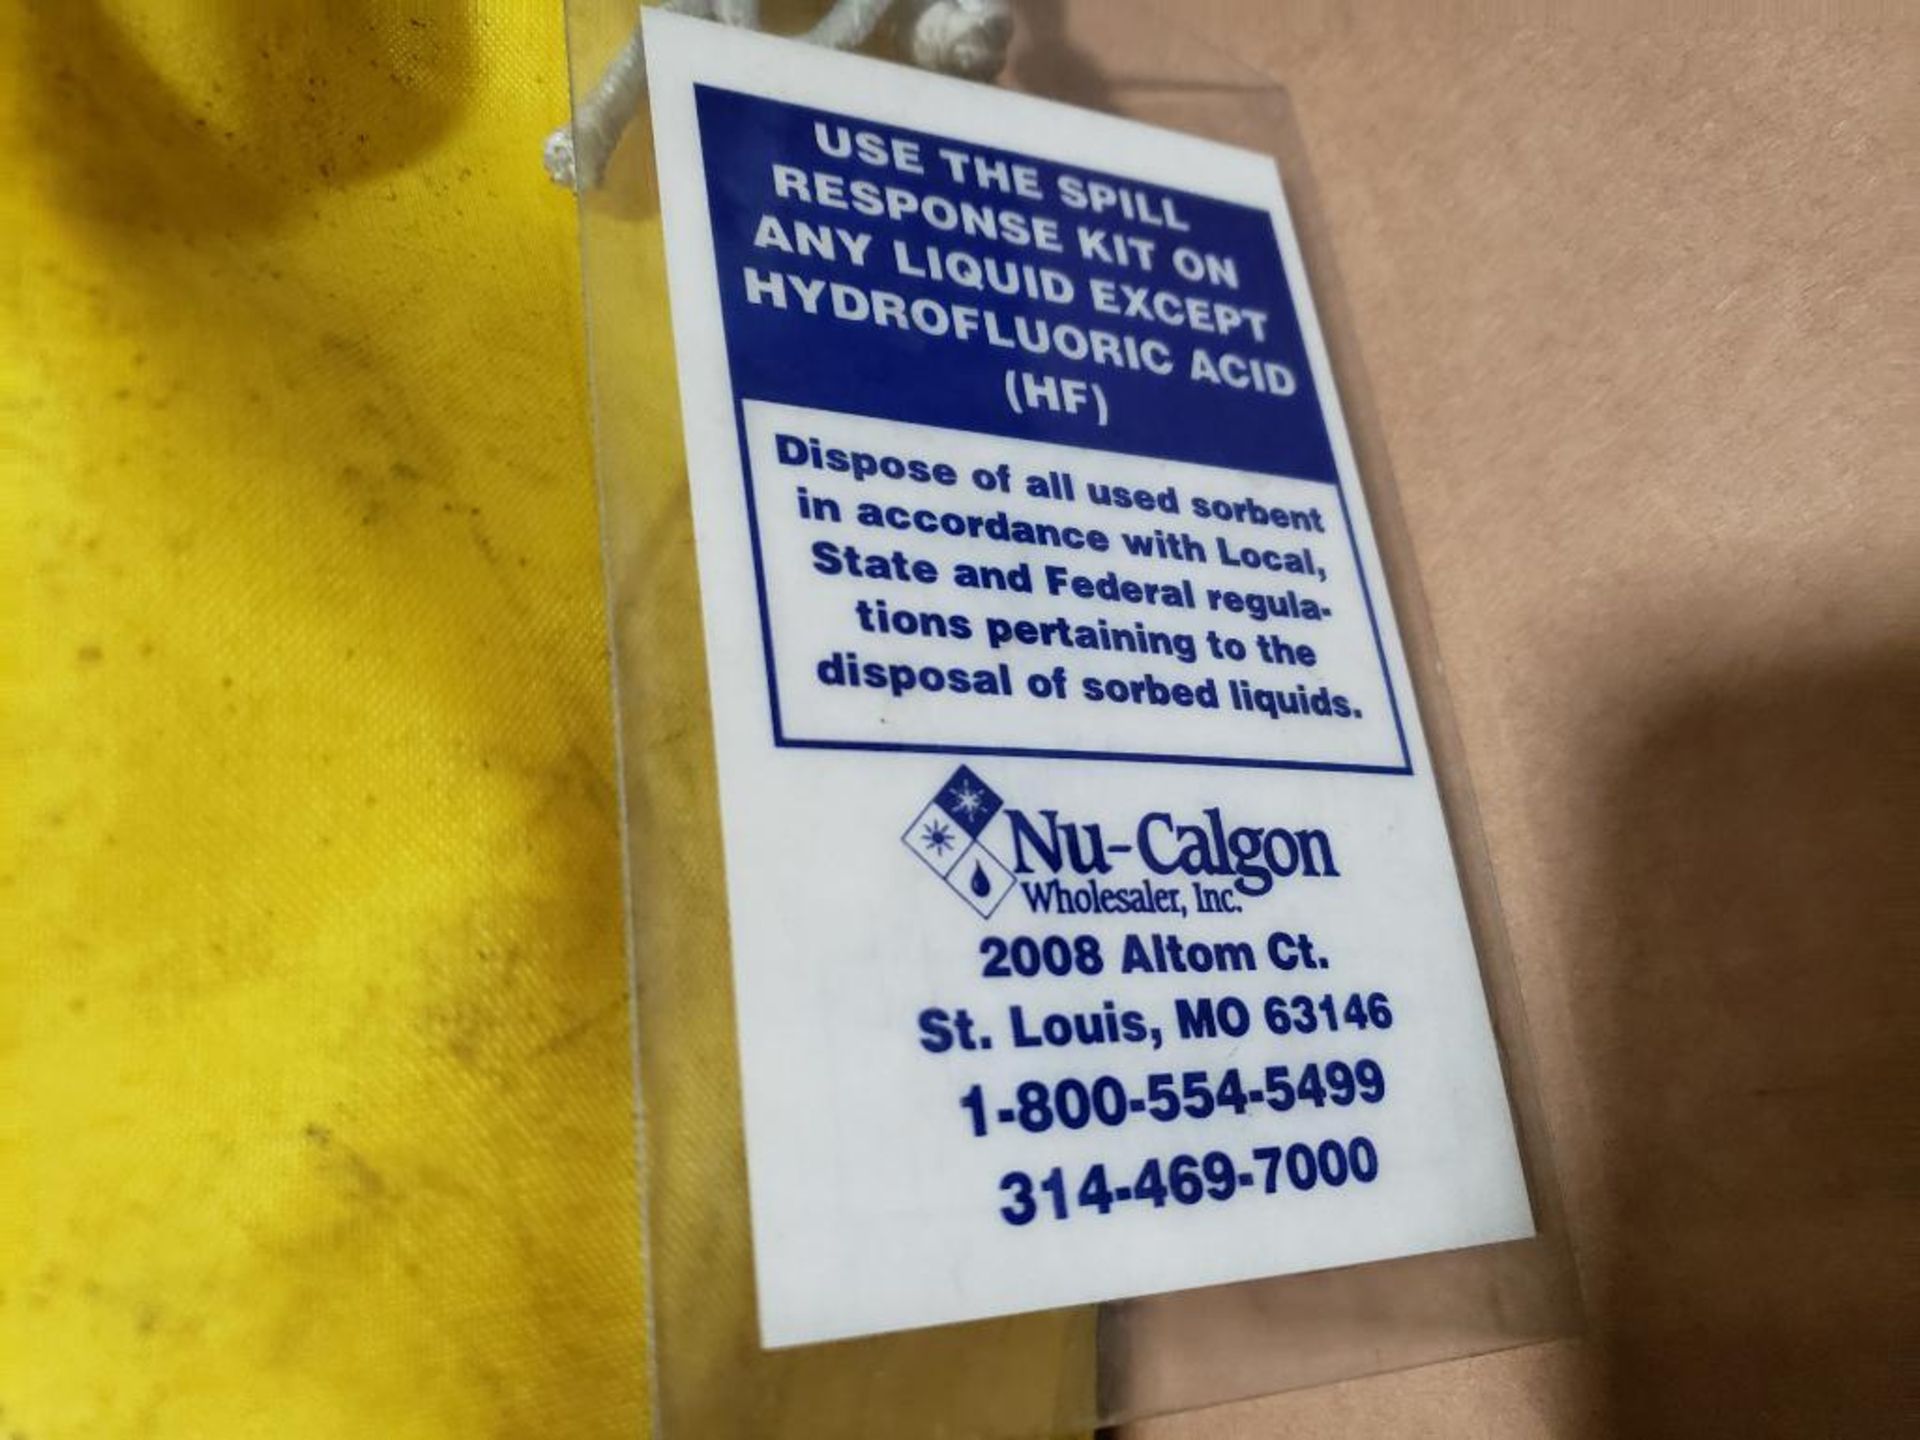 Qty 2 - Nu-Colgon spill response kit. Part number 4816-07. - Image 6 of 7